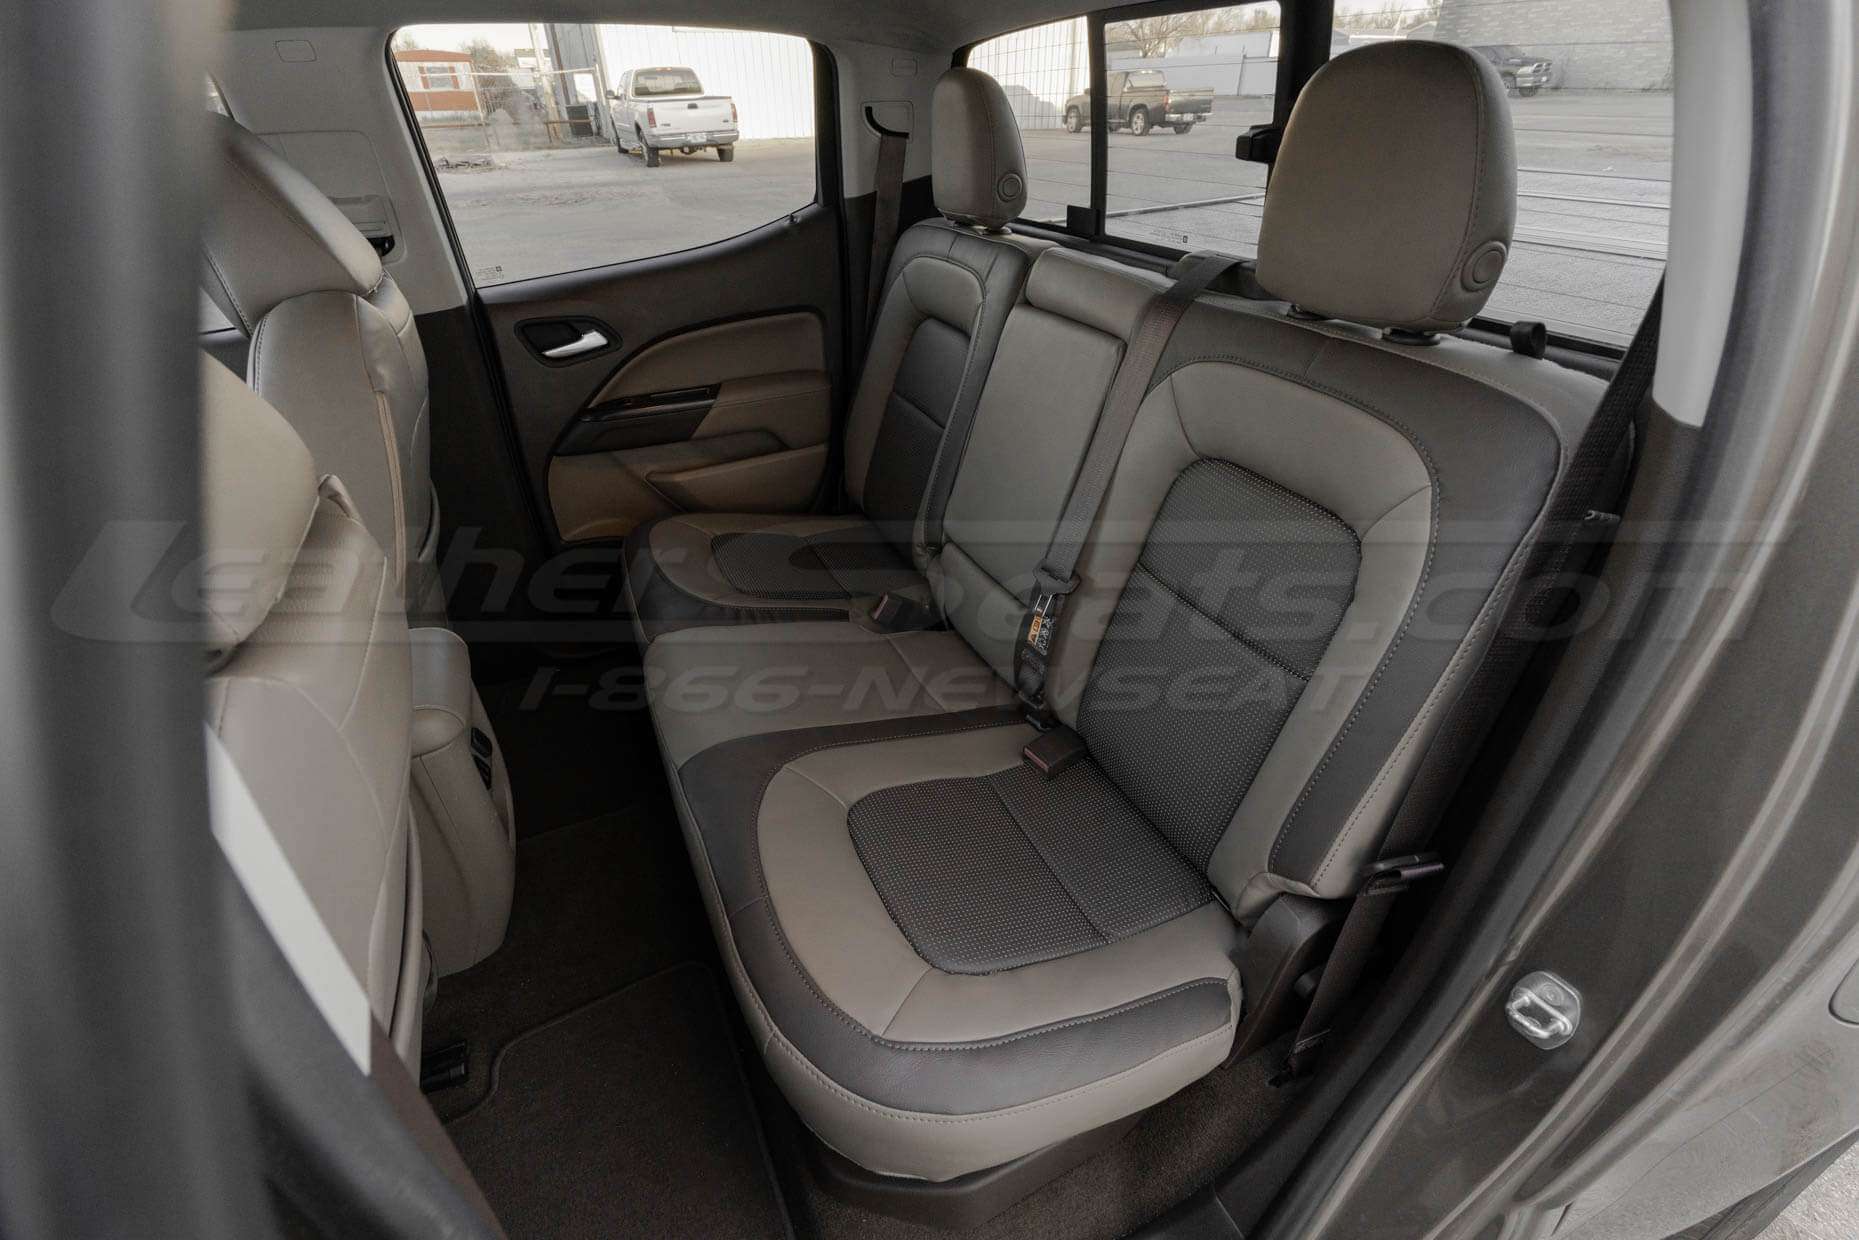 GMC Canyon installed leather seats - Bristol & Java - Rear seats from passenger side